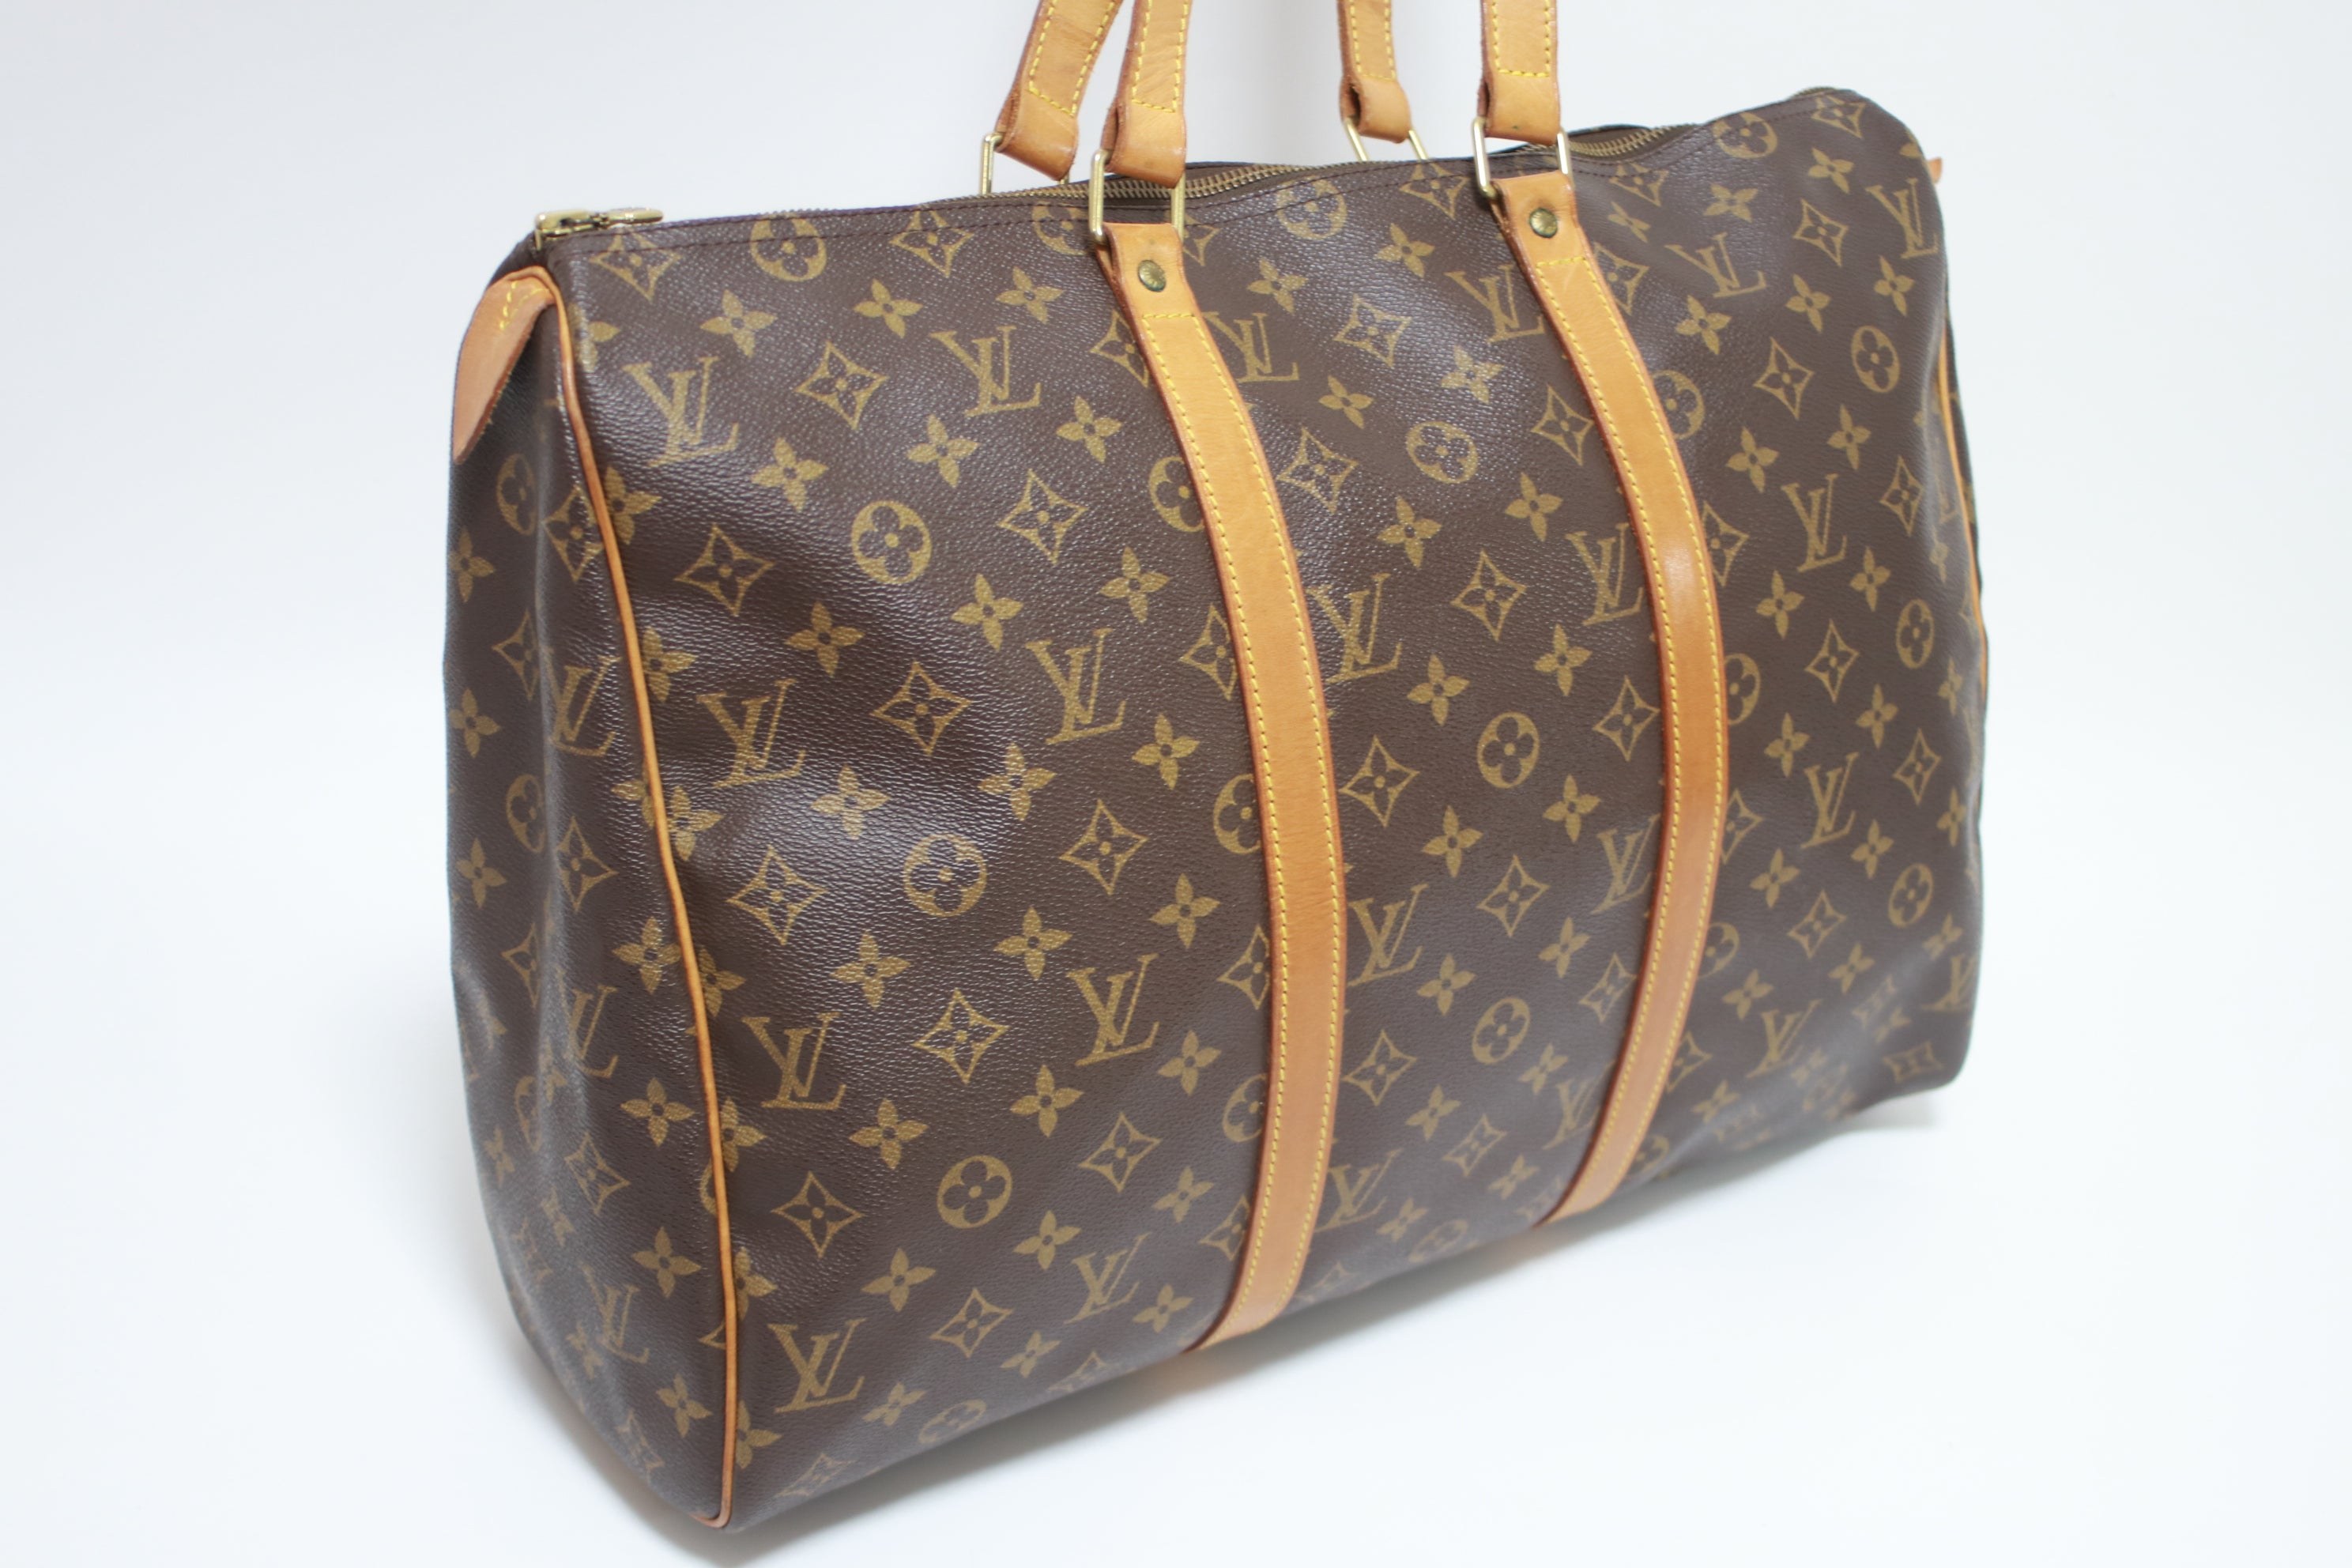 Louis Vuitton Sac Flanerie 45 Shoulder Tote Bag Used (7924)